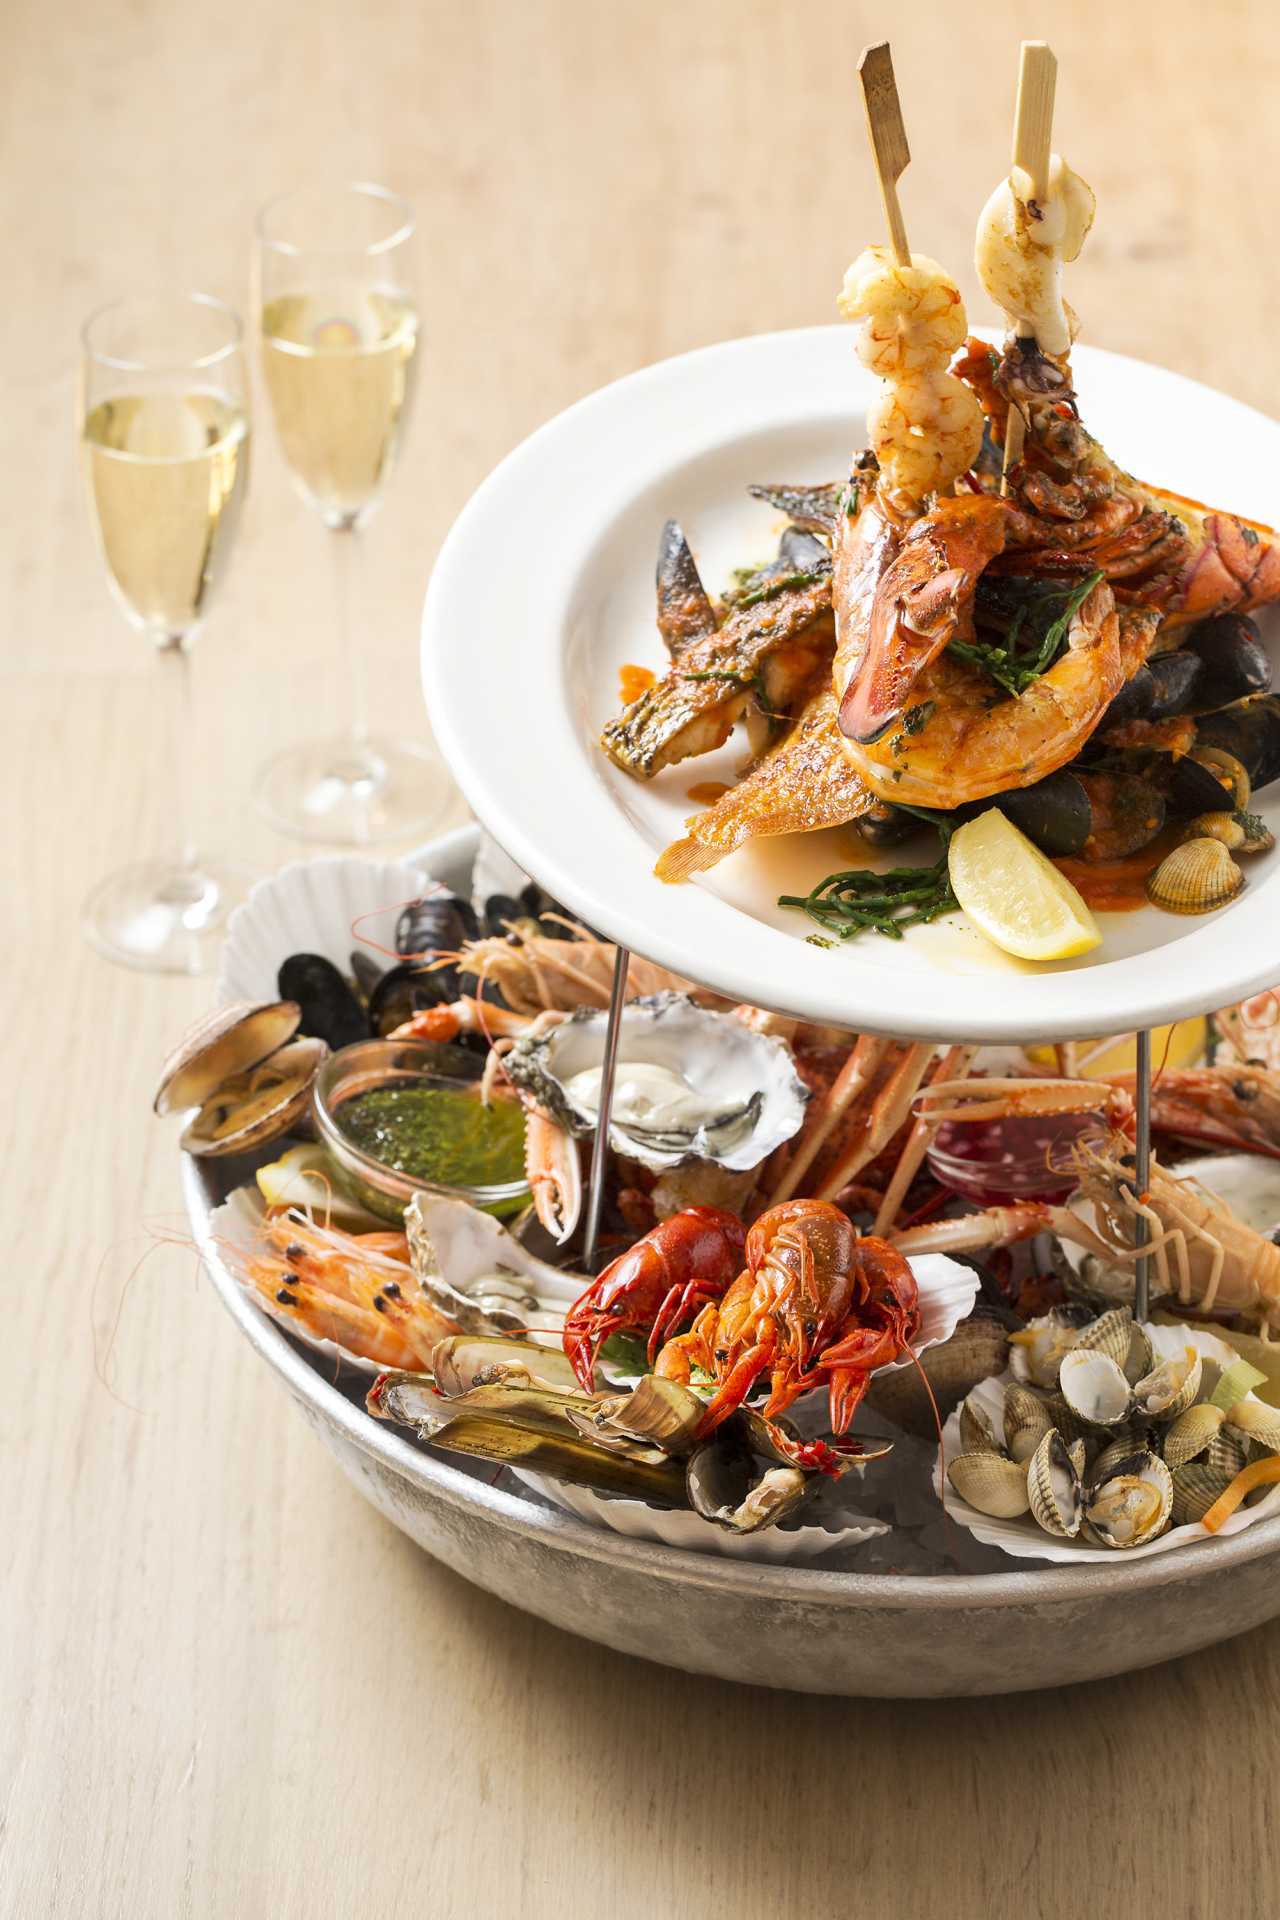 The Seafood Bar: the seafood platter